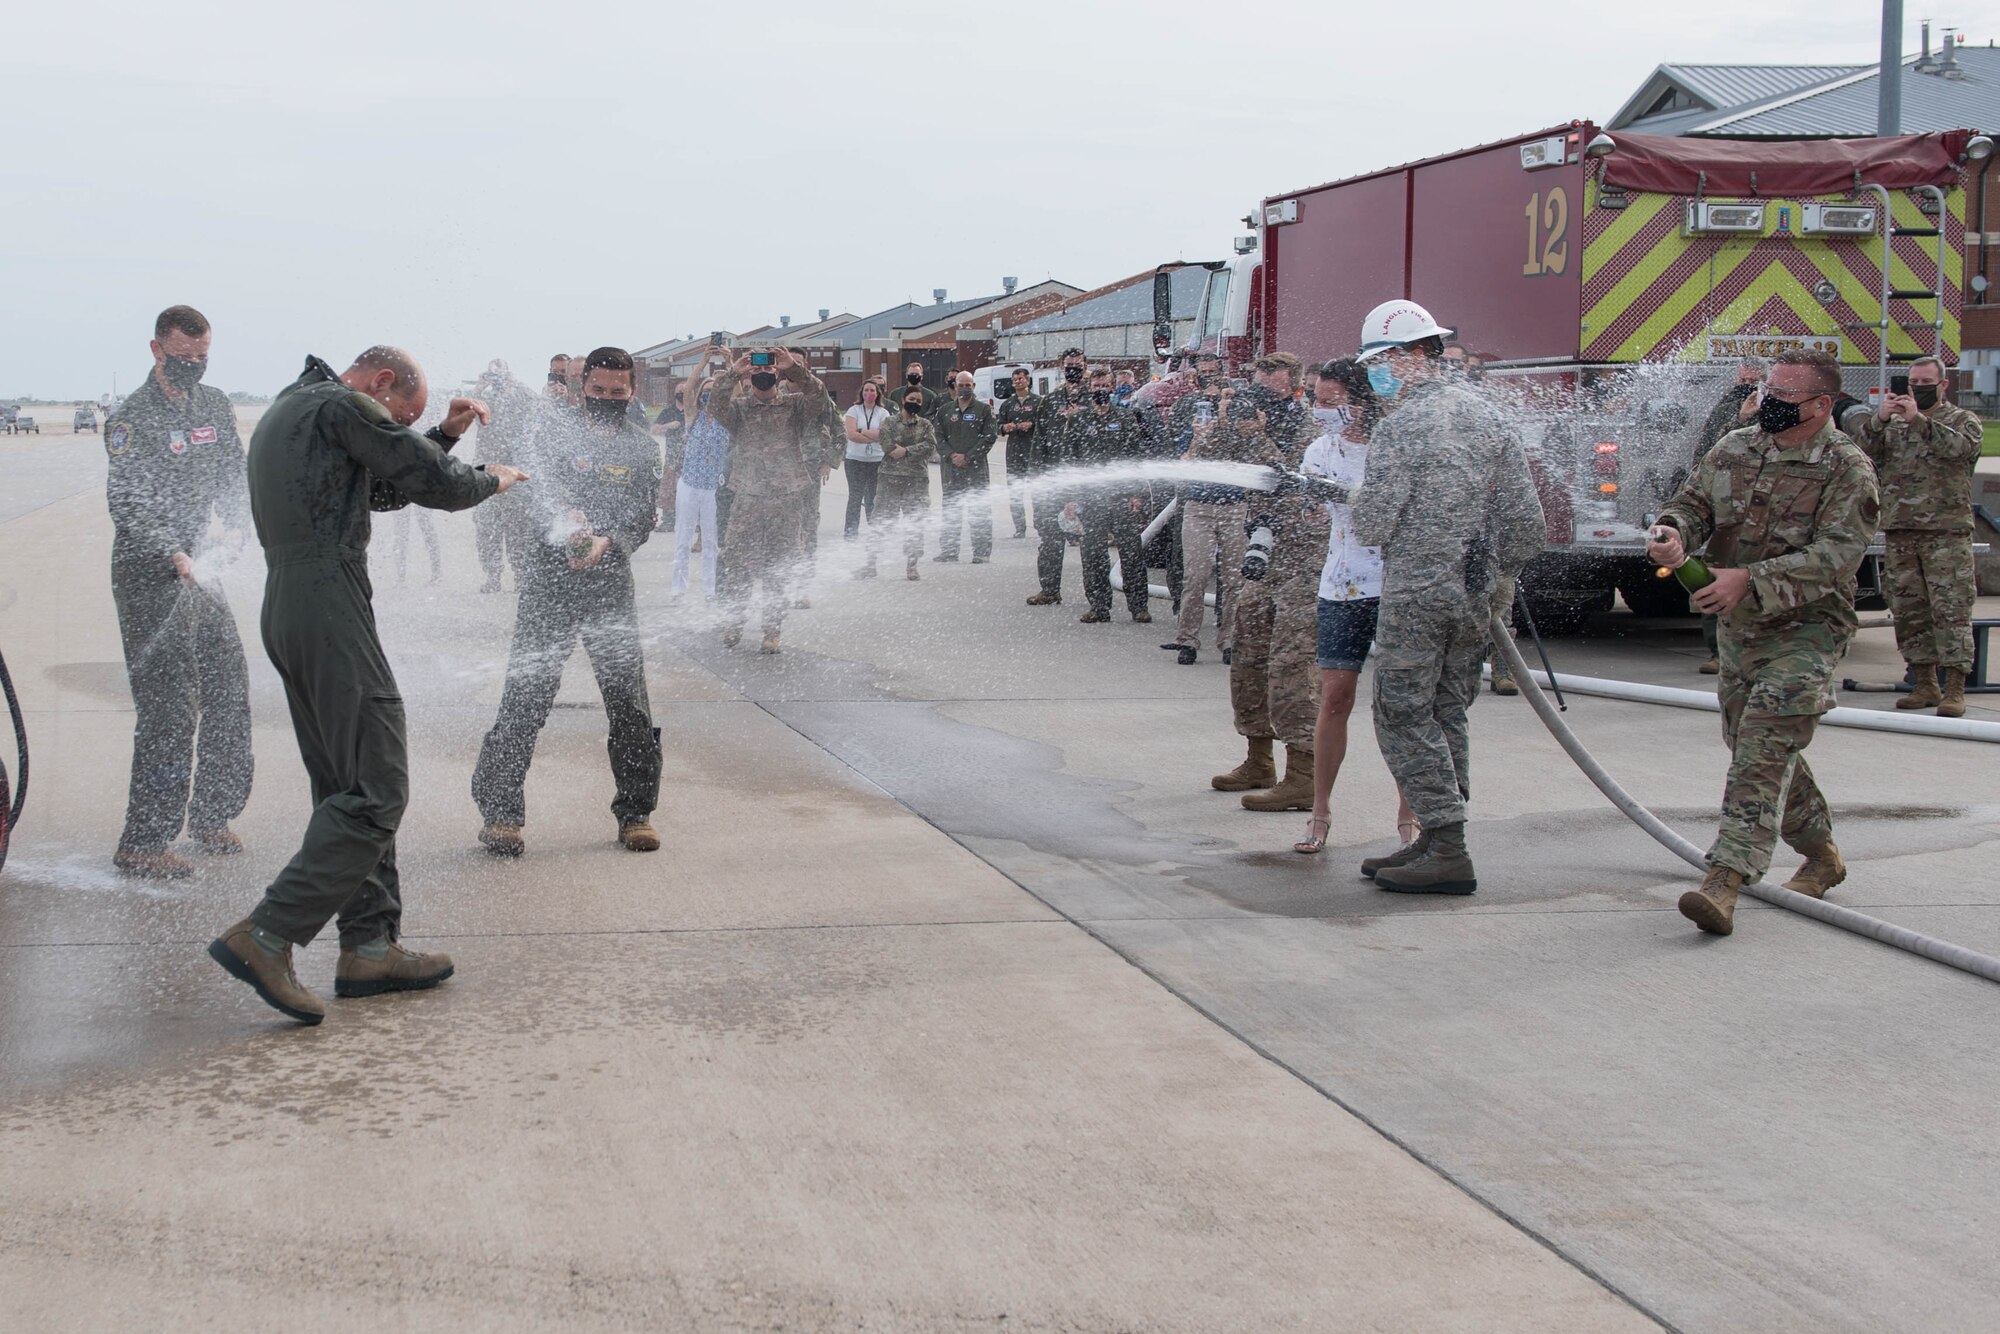 Spraying with fire hose